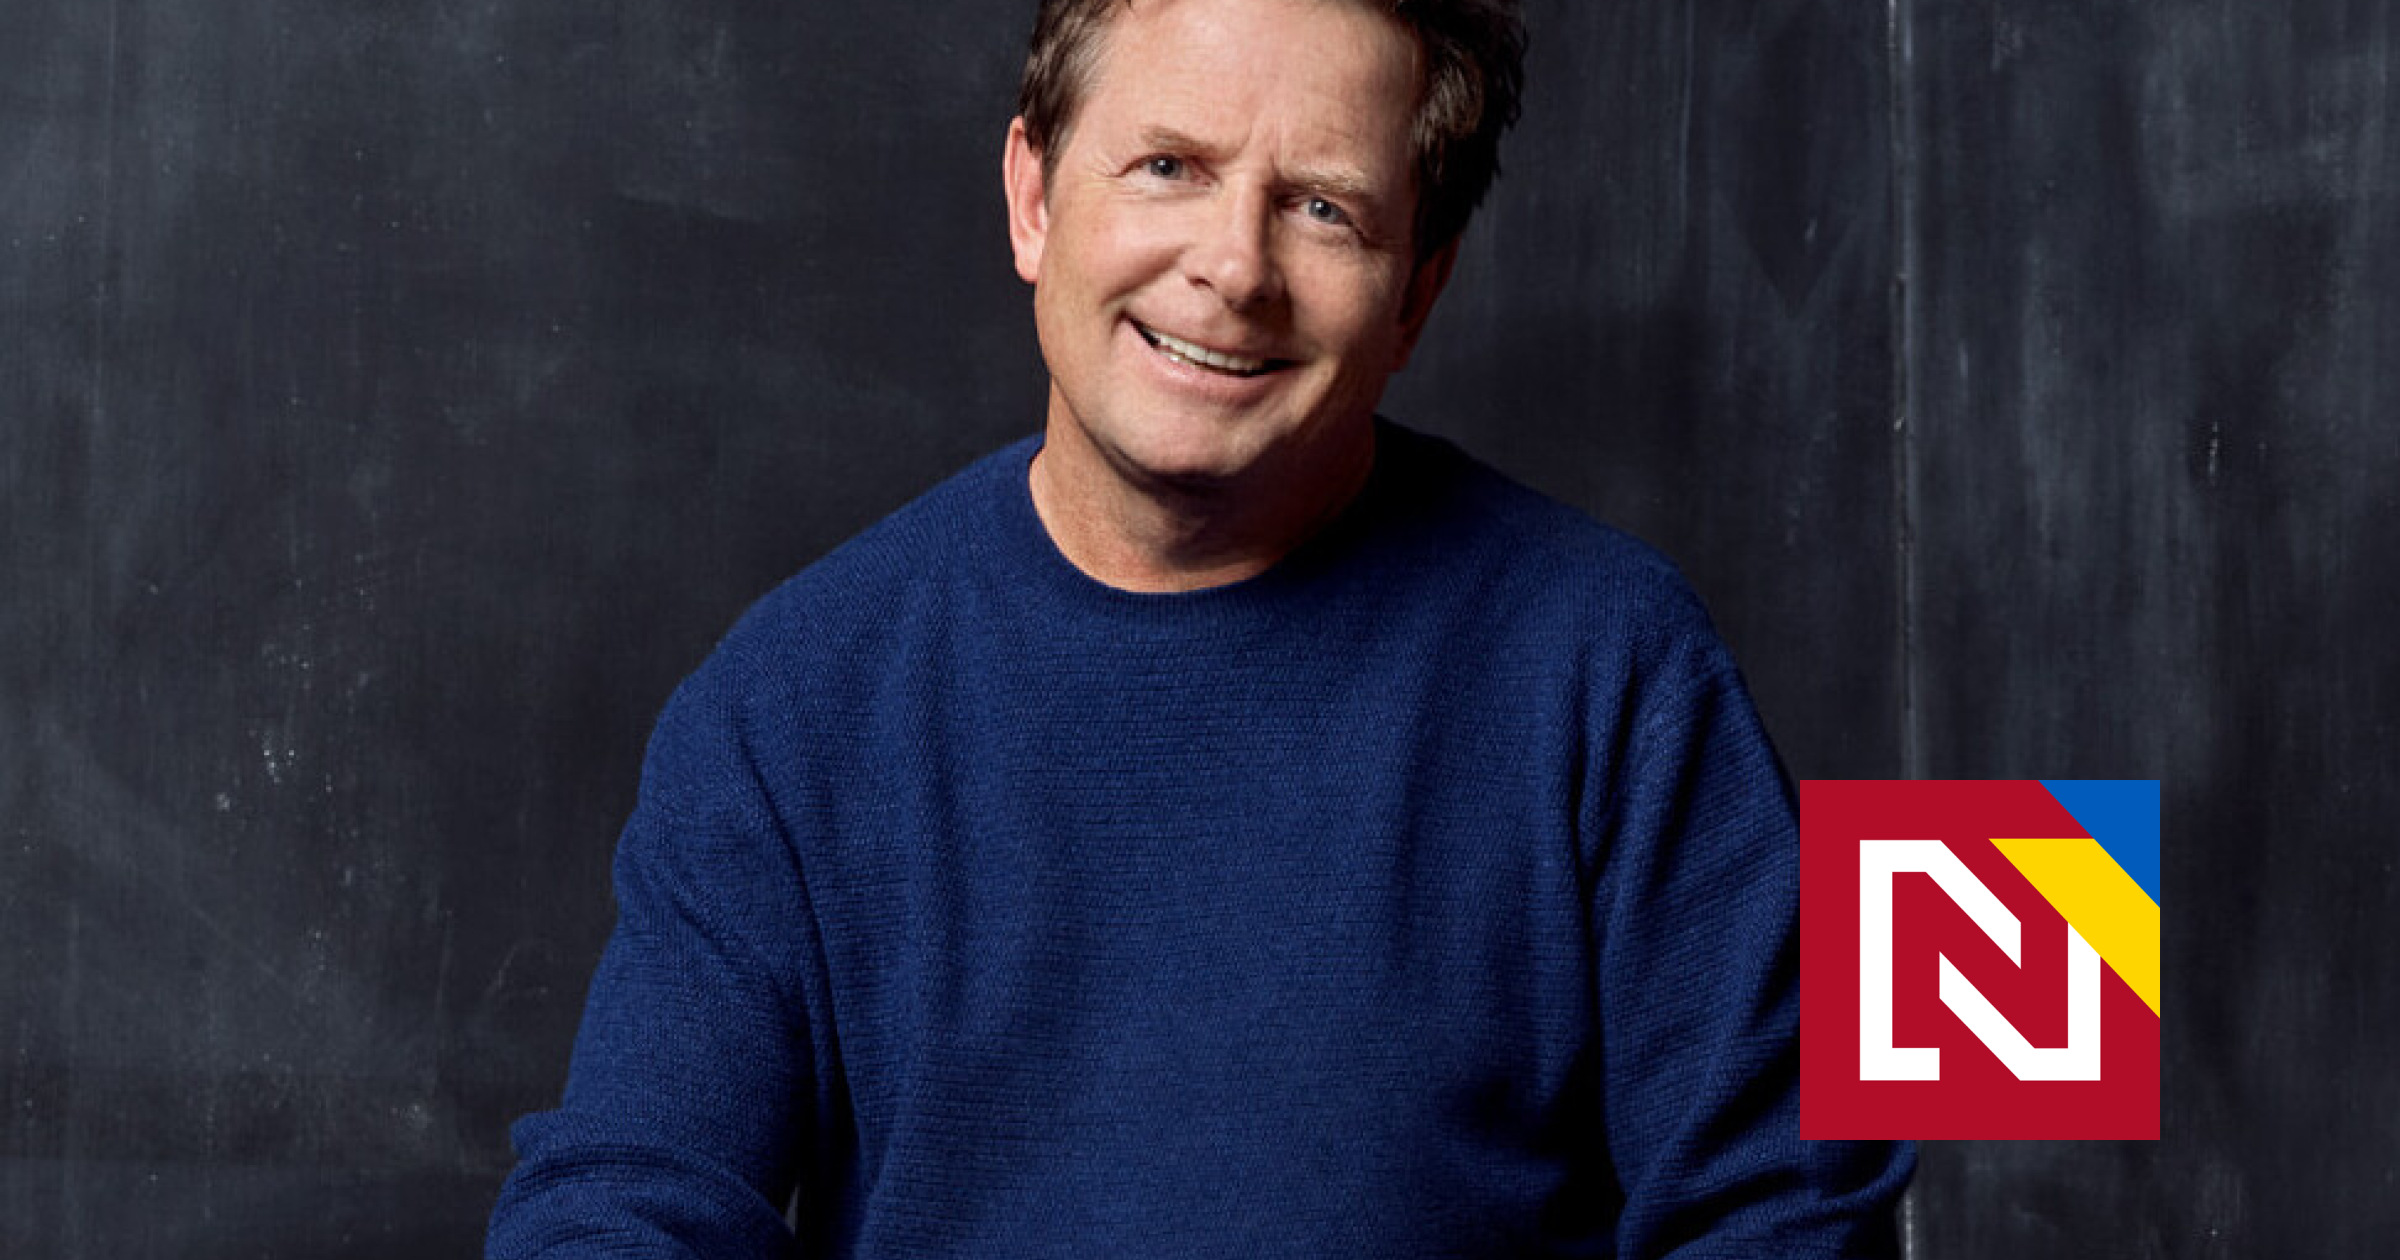 In 20 years I’ll be cured or in a pickle, says actor Michael J. Fox in documentary about life with Parkinson’s